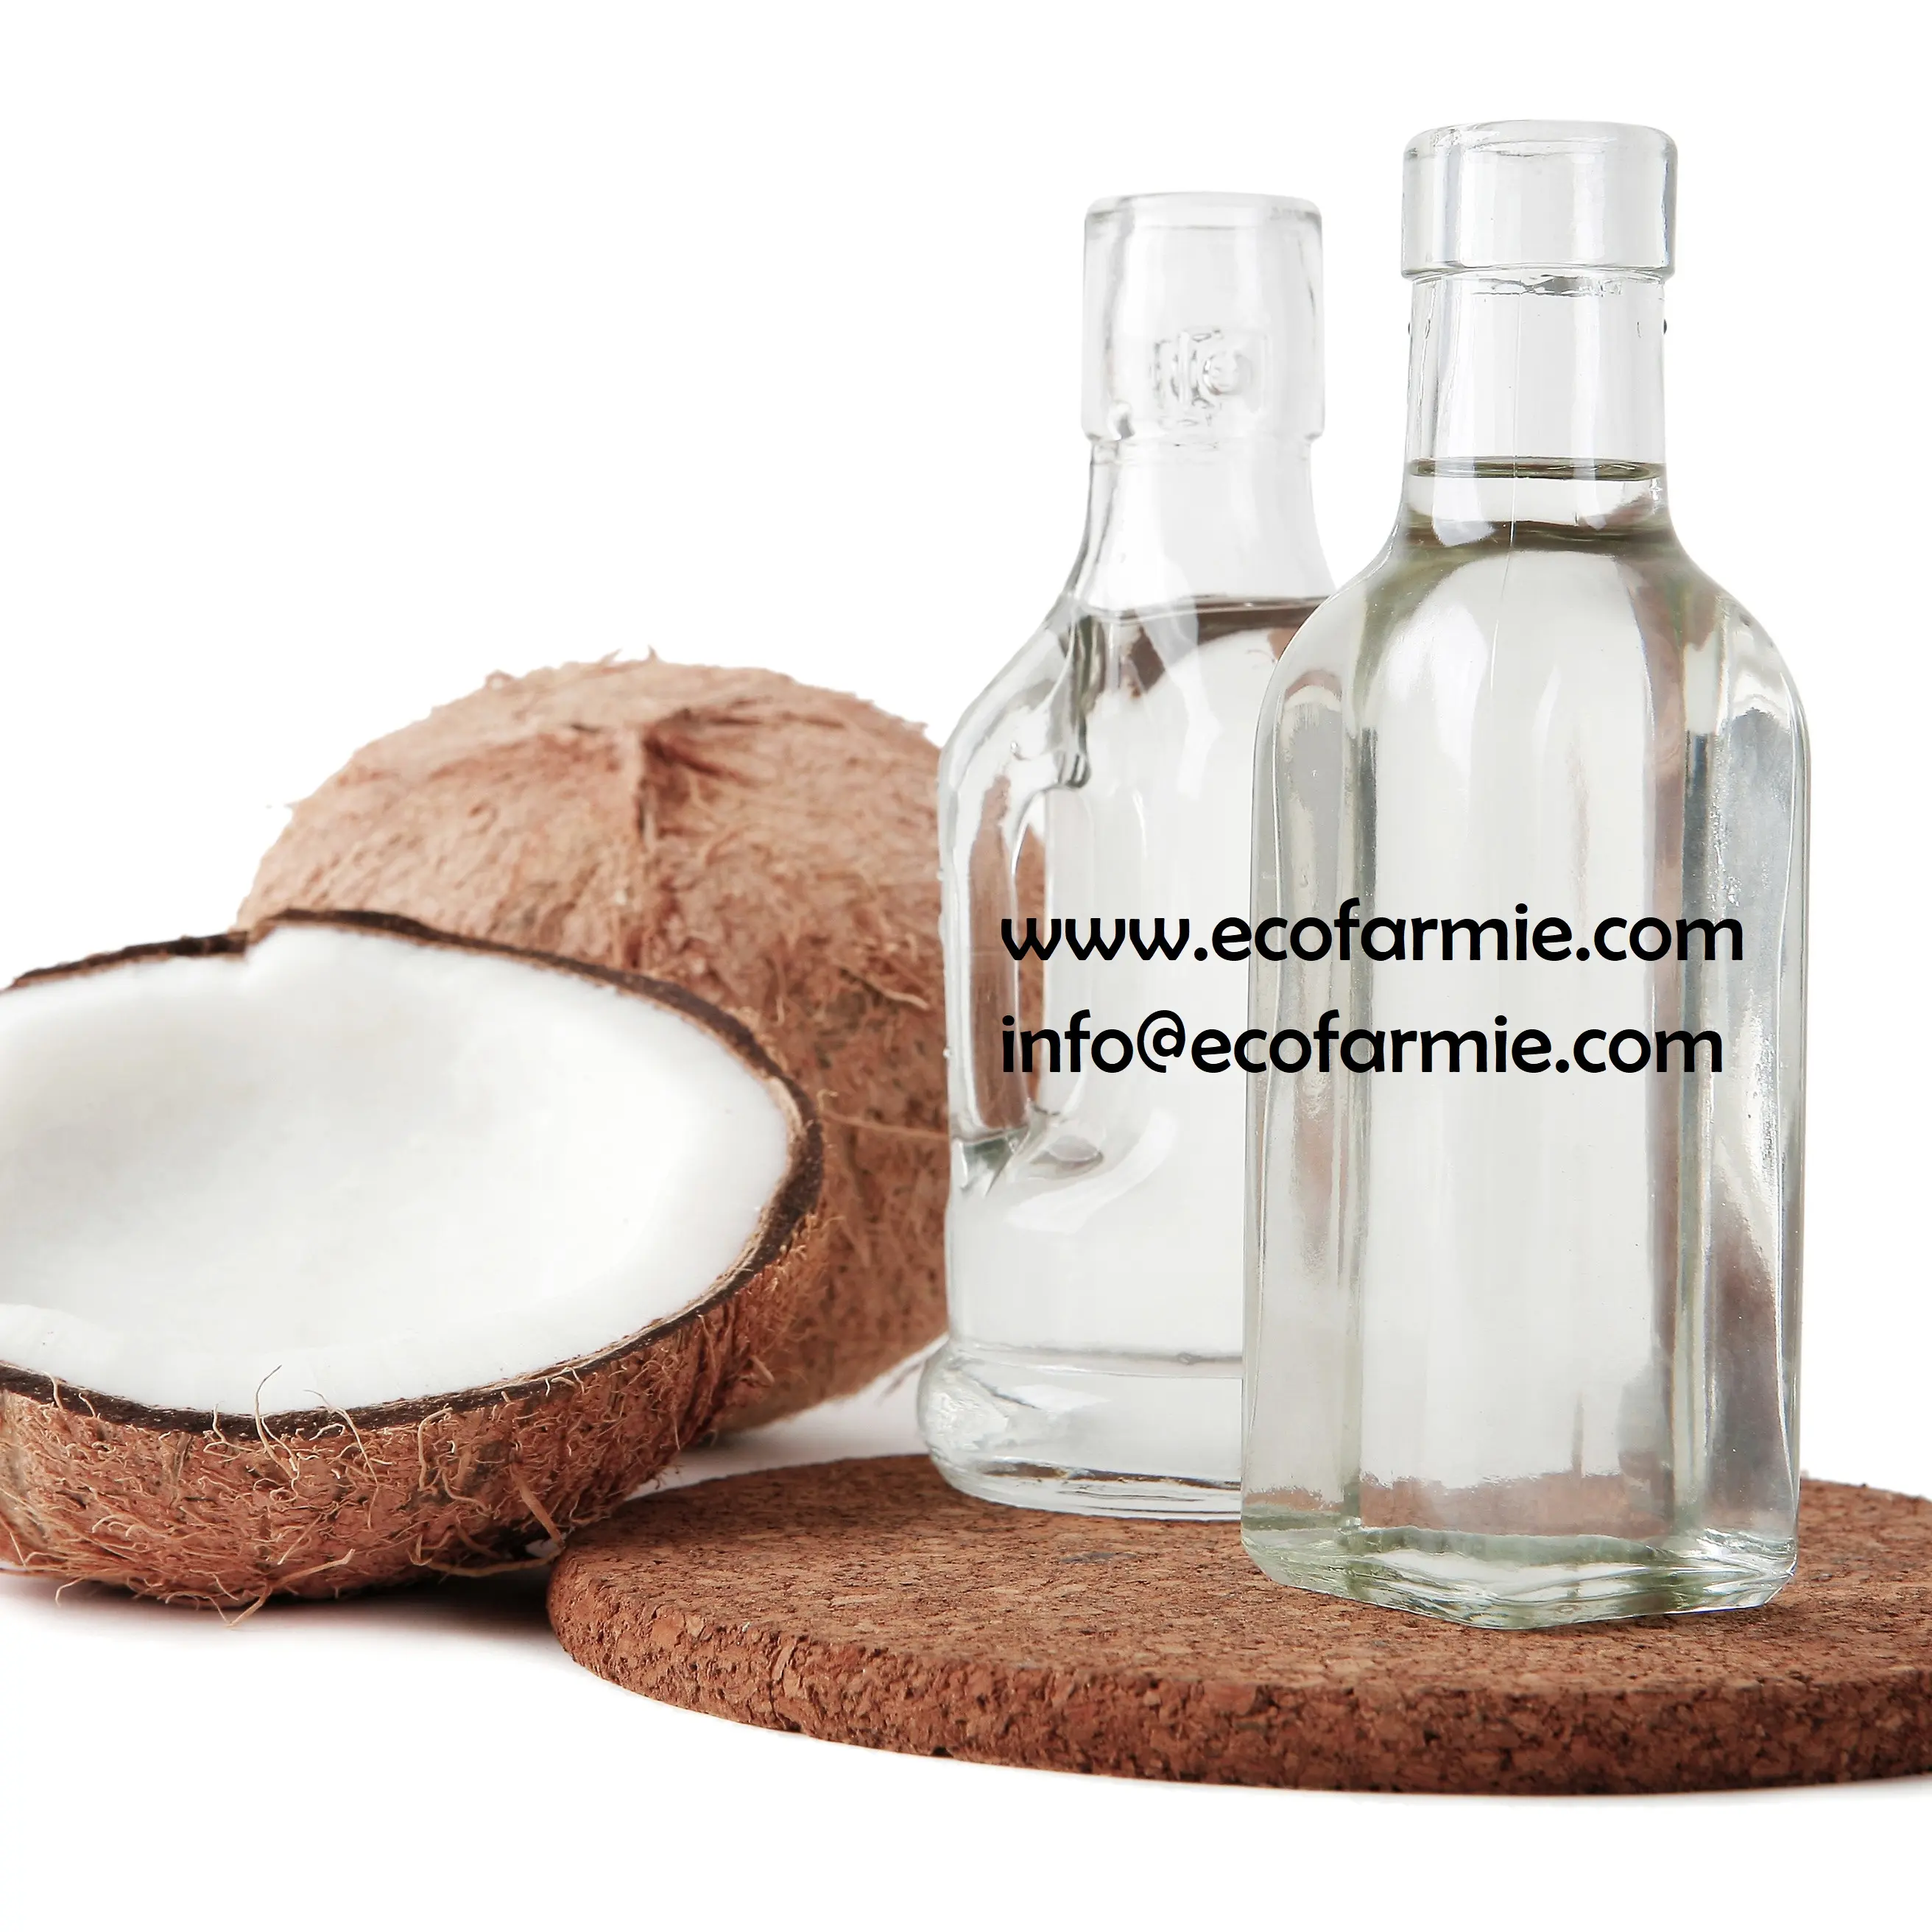 Cold pressed extra virgin coconut oil/ Organic MCT oil/ Fractionated coconut oil